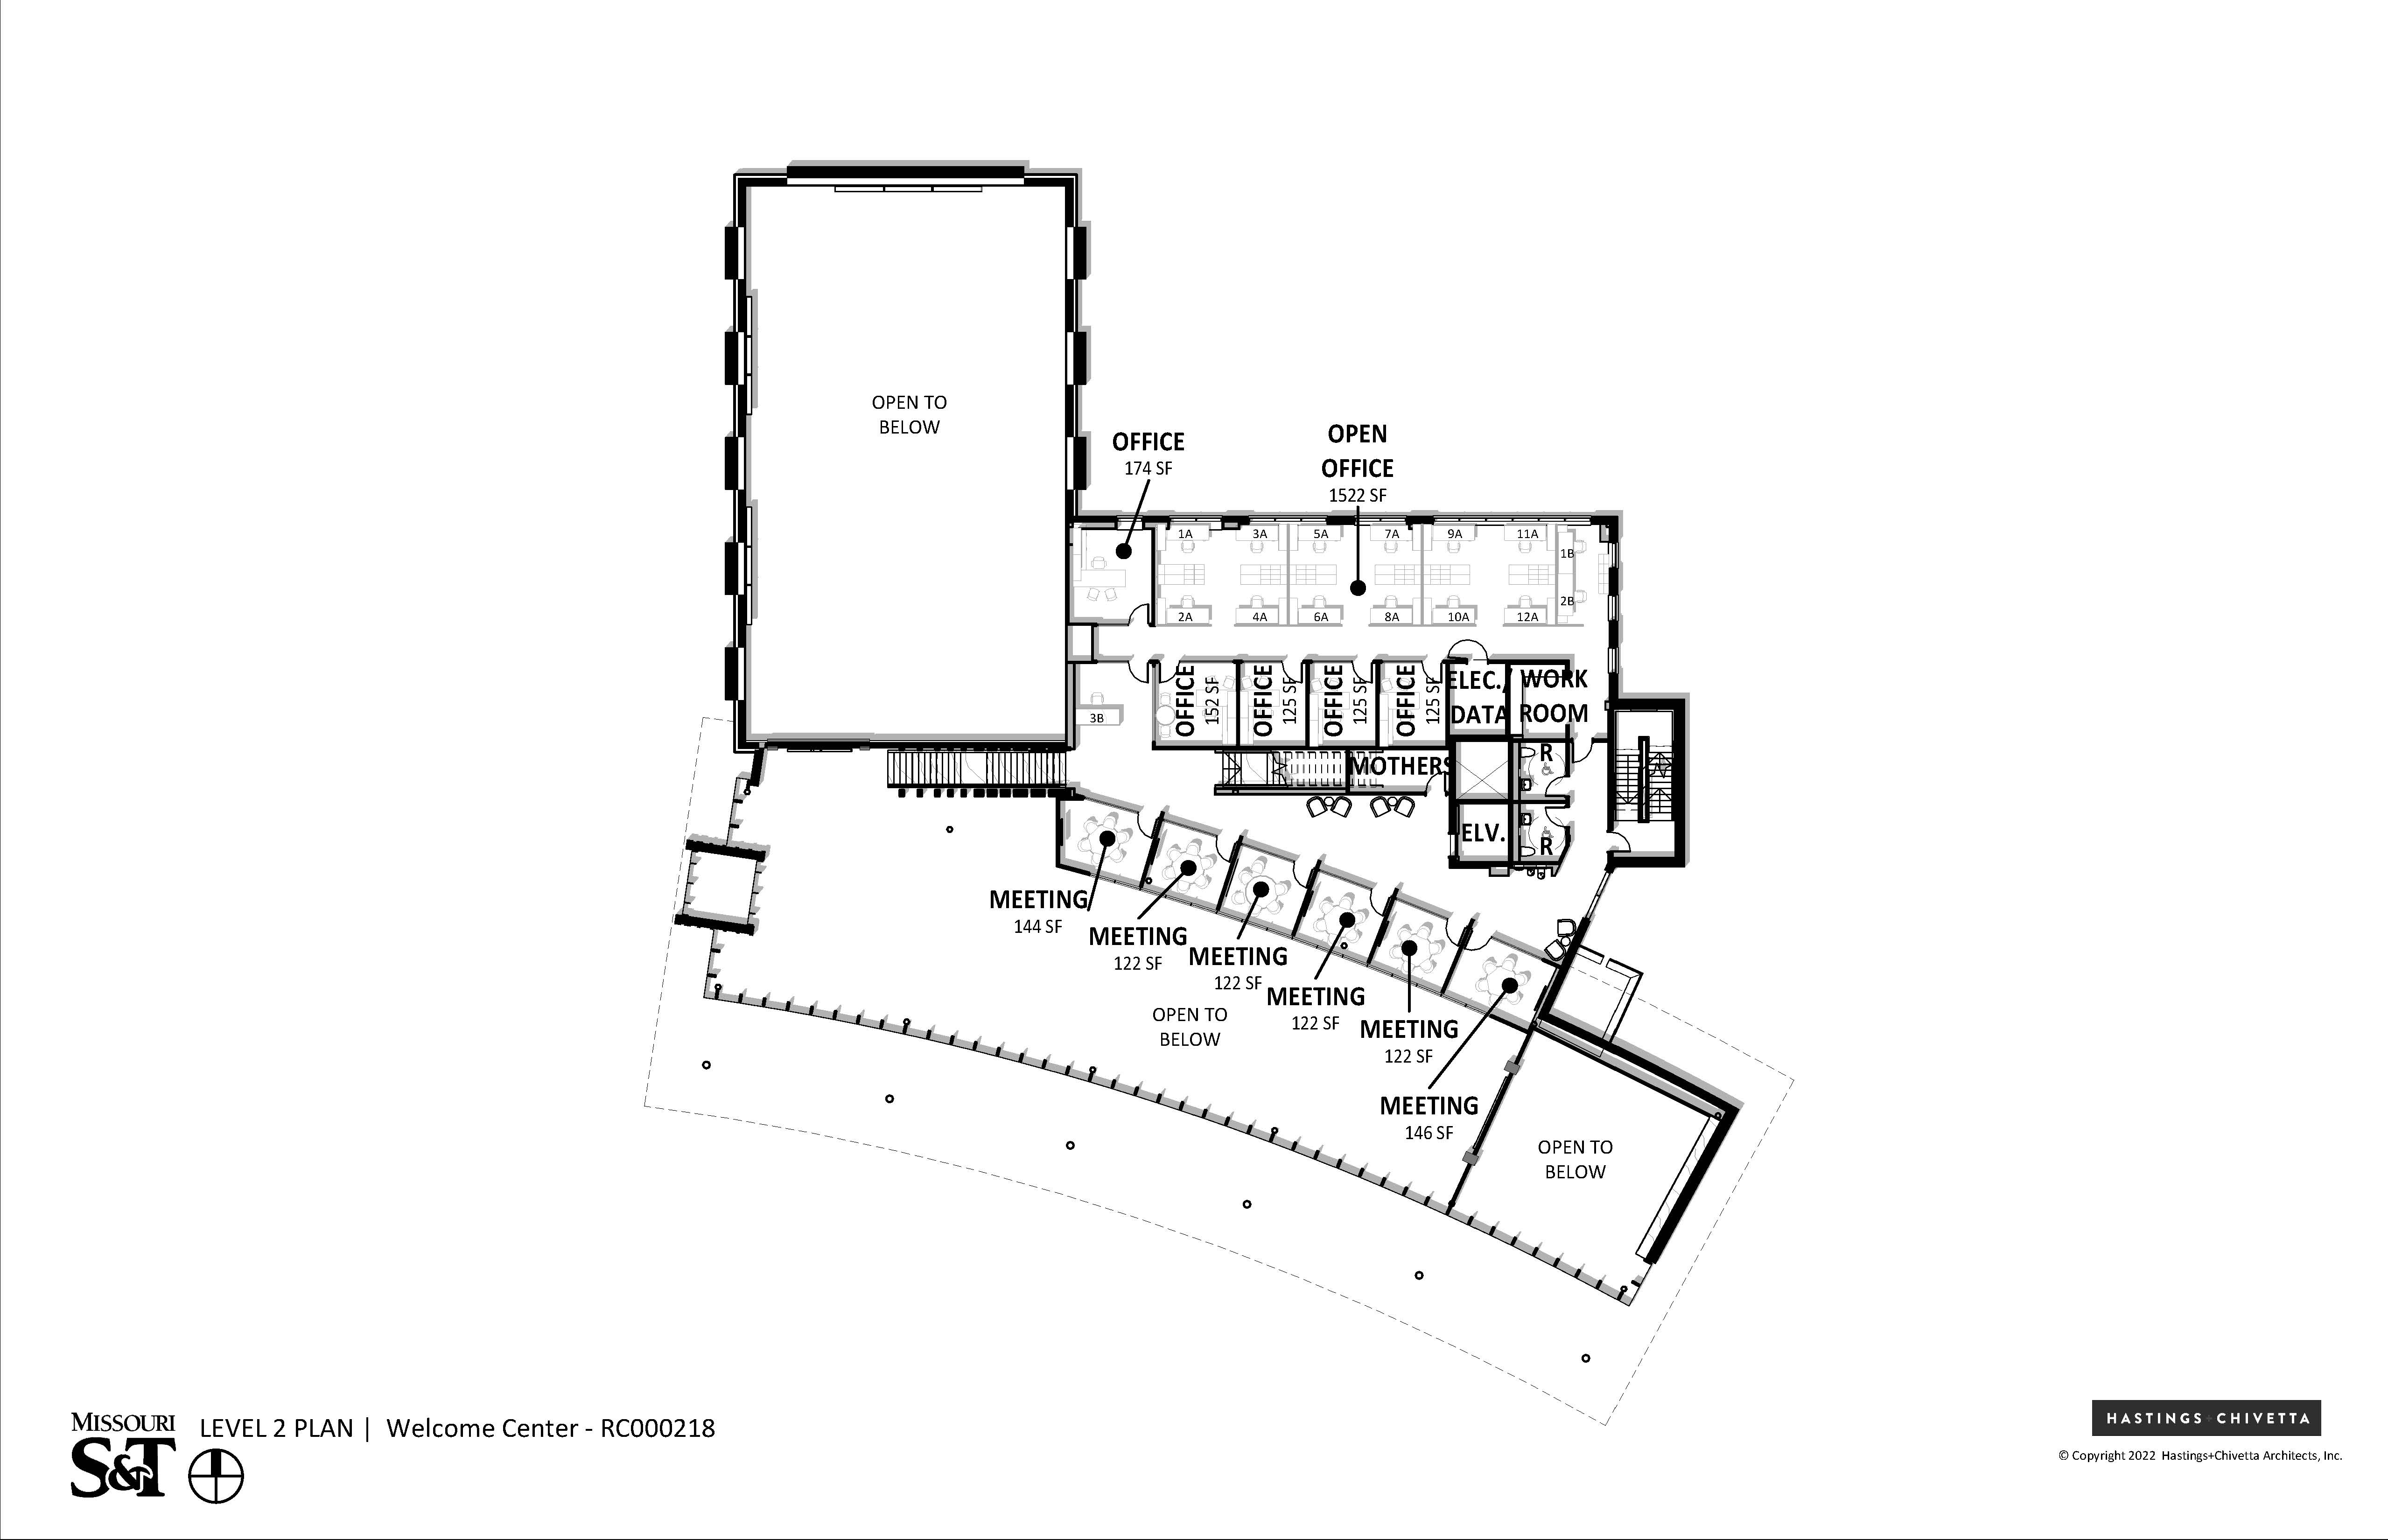 Welcome Center Plan Level 2